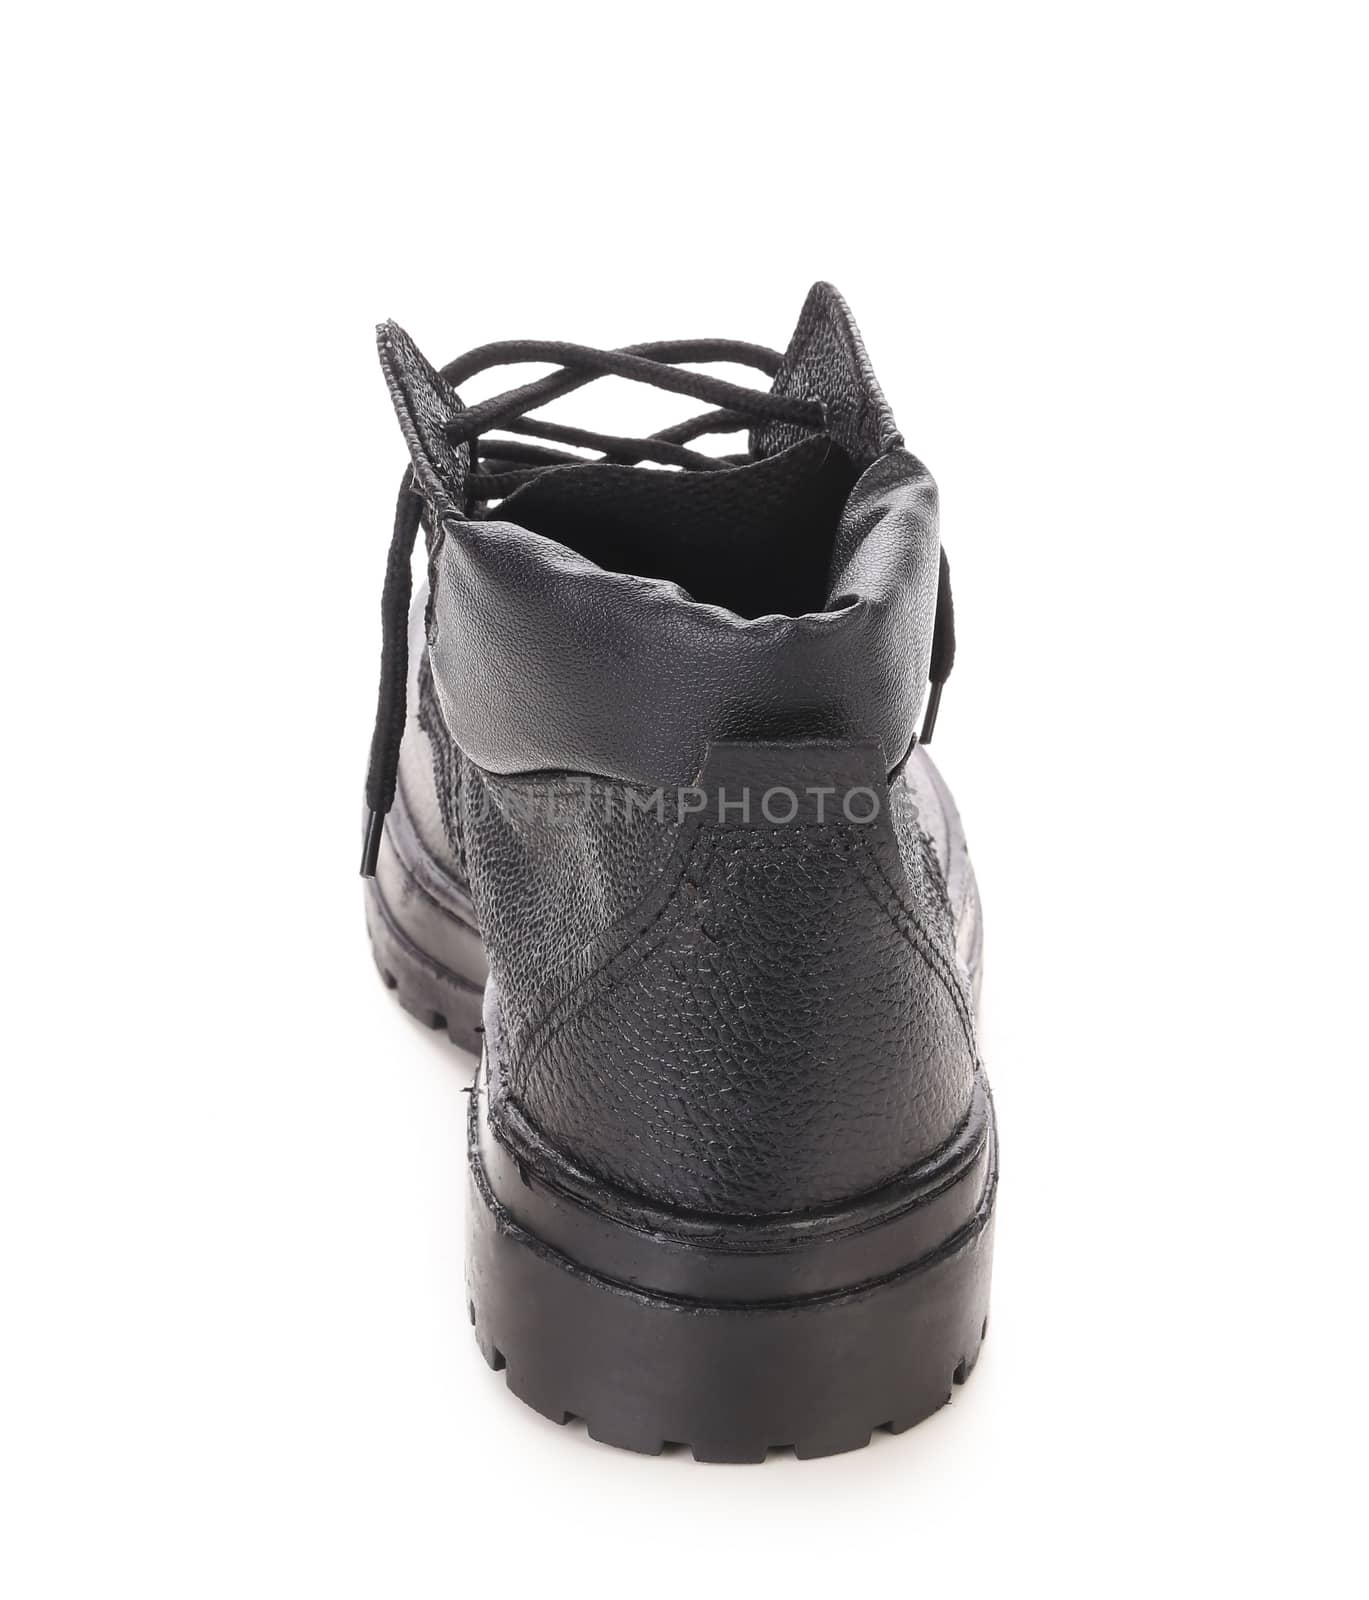 Winter black boot back view. Isolated on a white background.